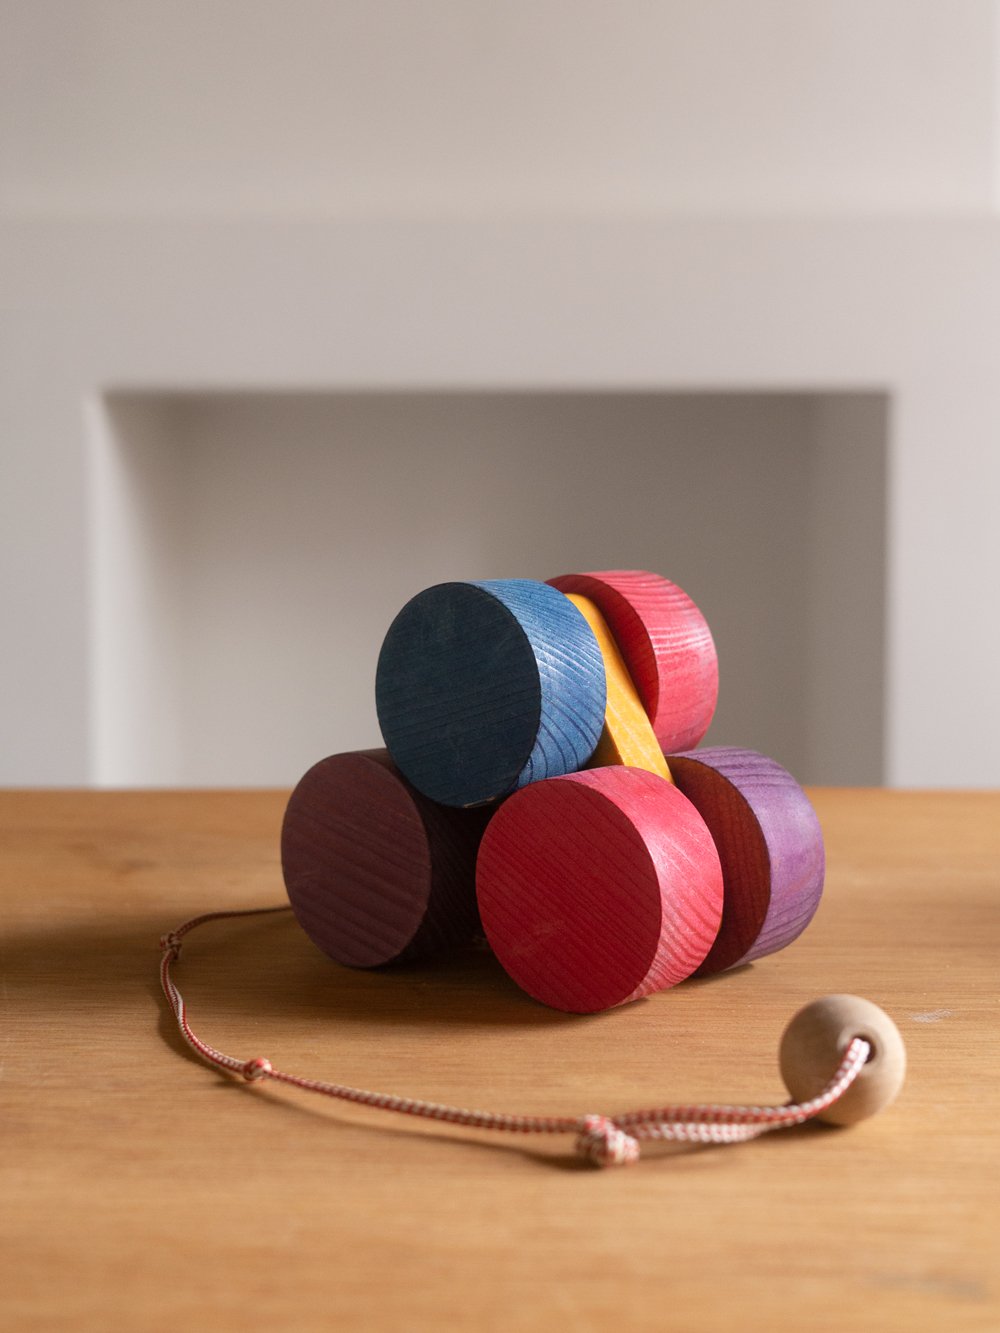 Image of wooden pull toy